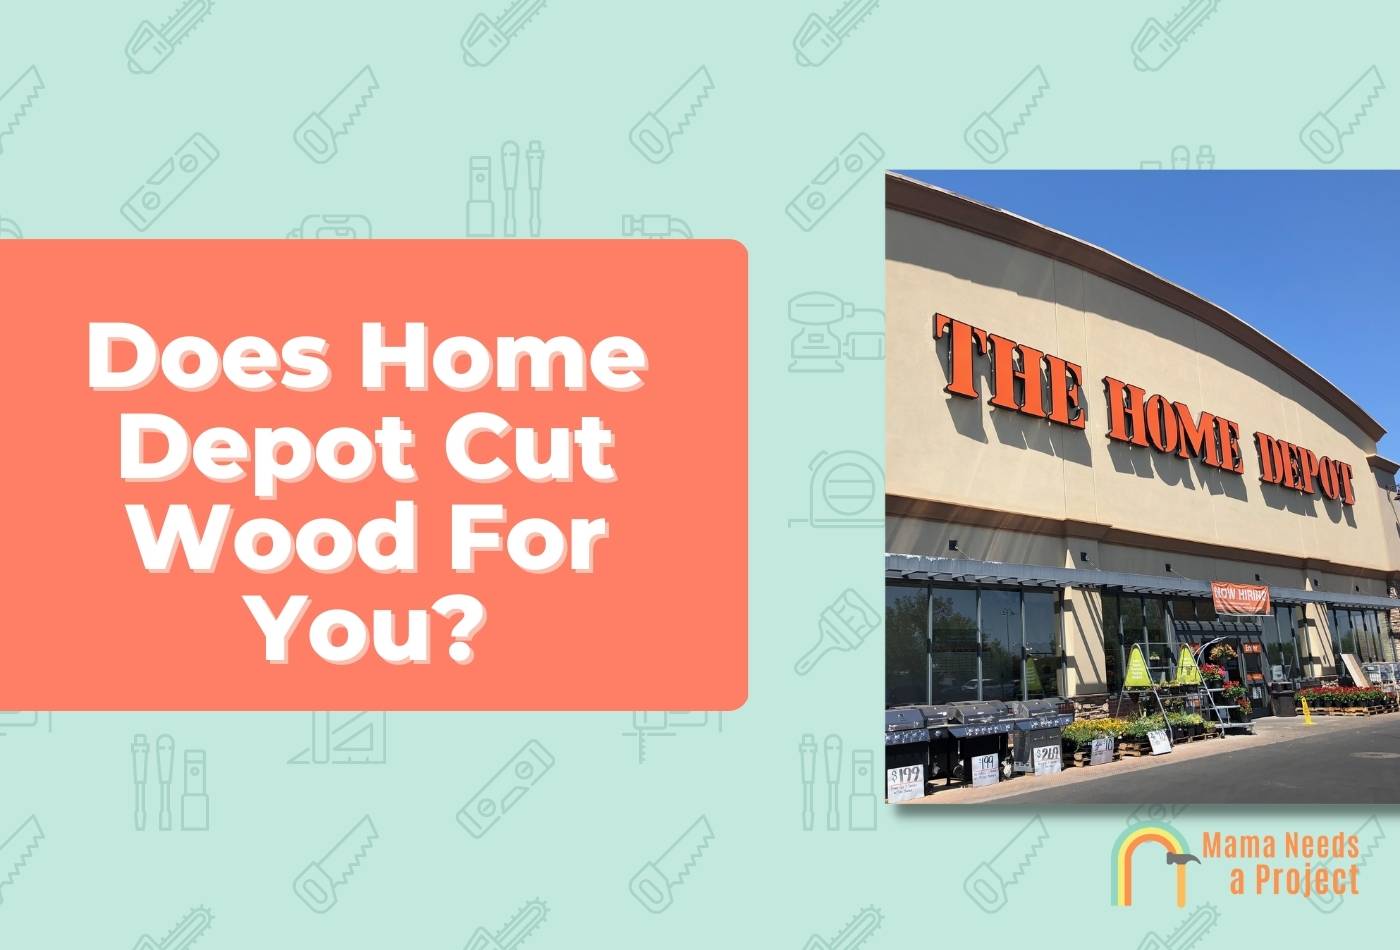 Does Home Depot Cut Wood For You